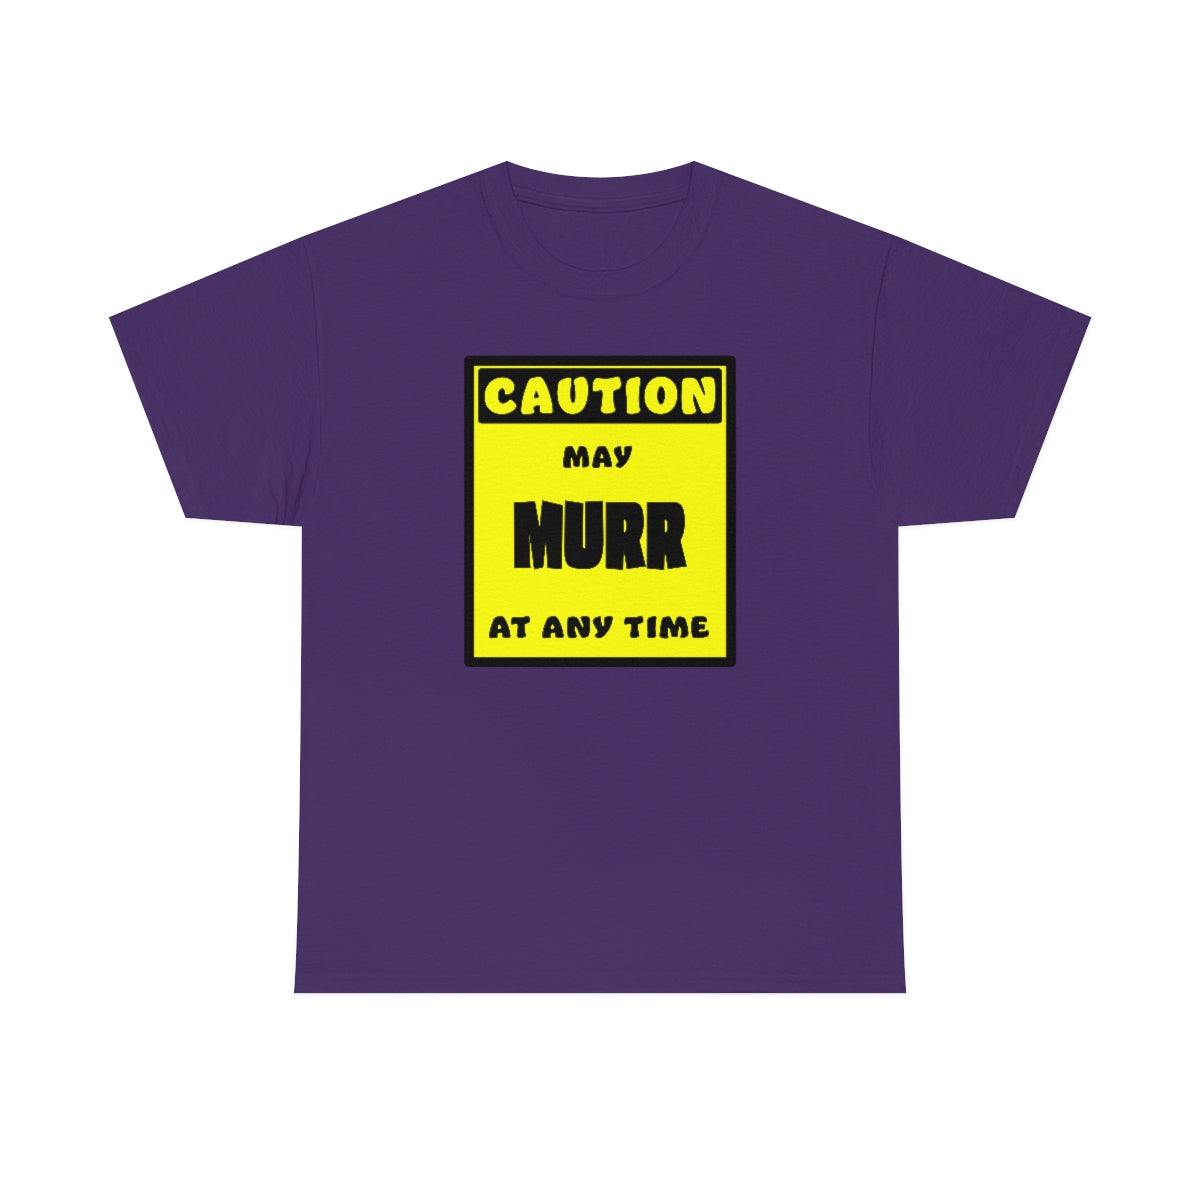 CAUTION! May MURR at any time! - T-Shirt T-Shirt AFLT-Whootorca Purple S 